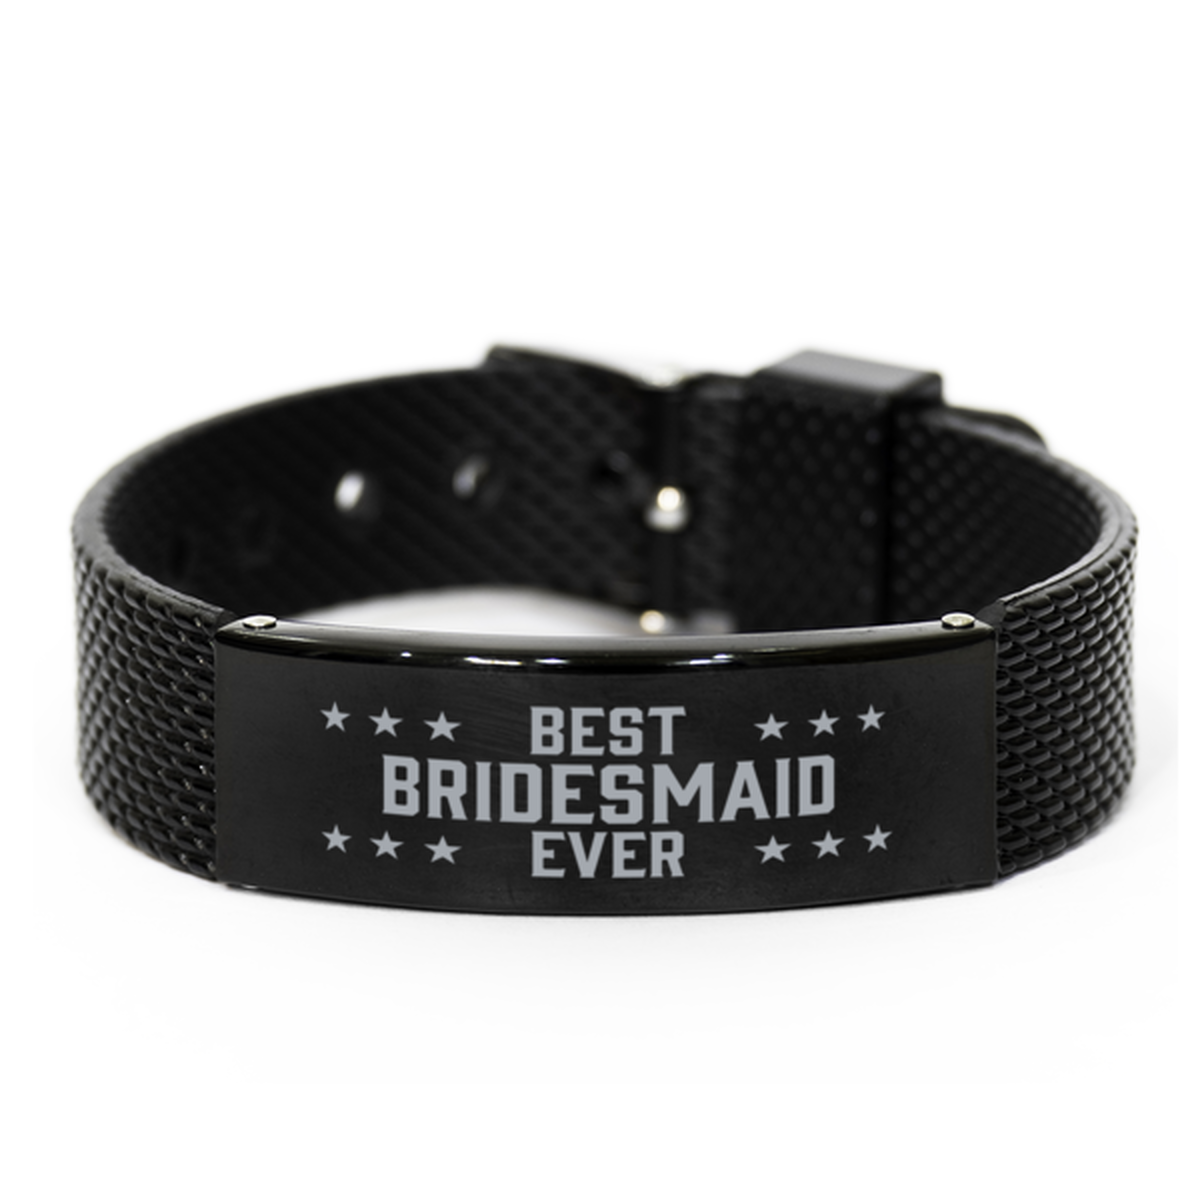 Best Bridemaid Ever Bridemaid Gifts, Gag Engraved Bracelet For Bridemaid, Best Family Gifts For Women